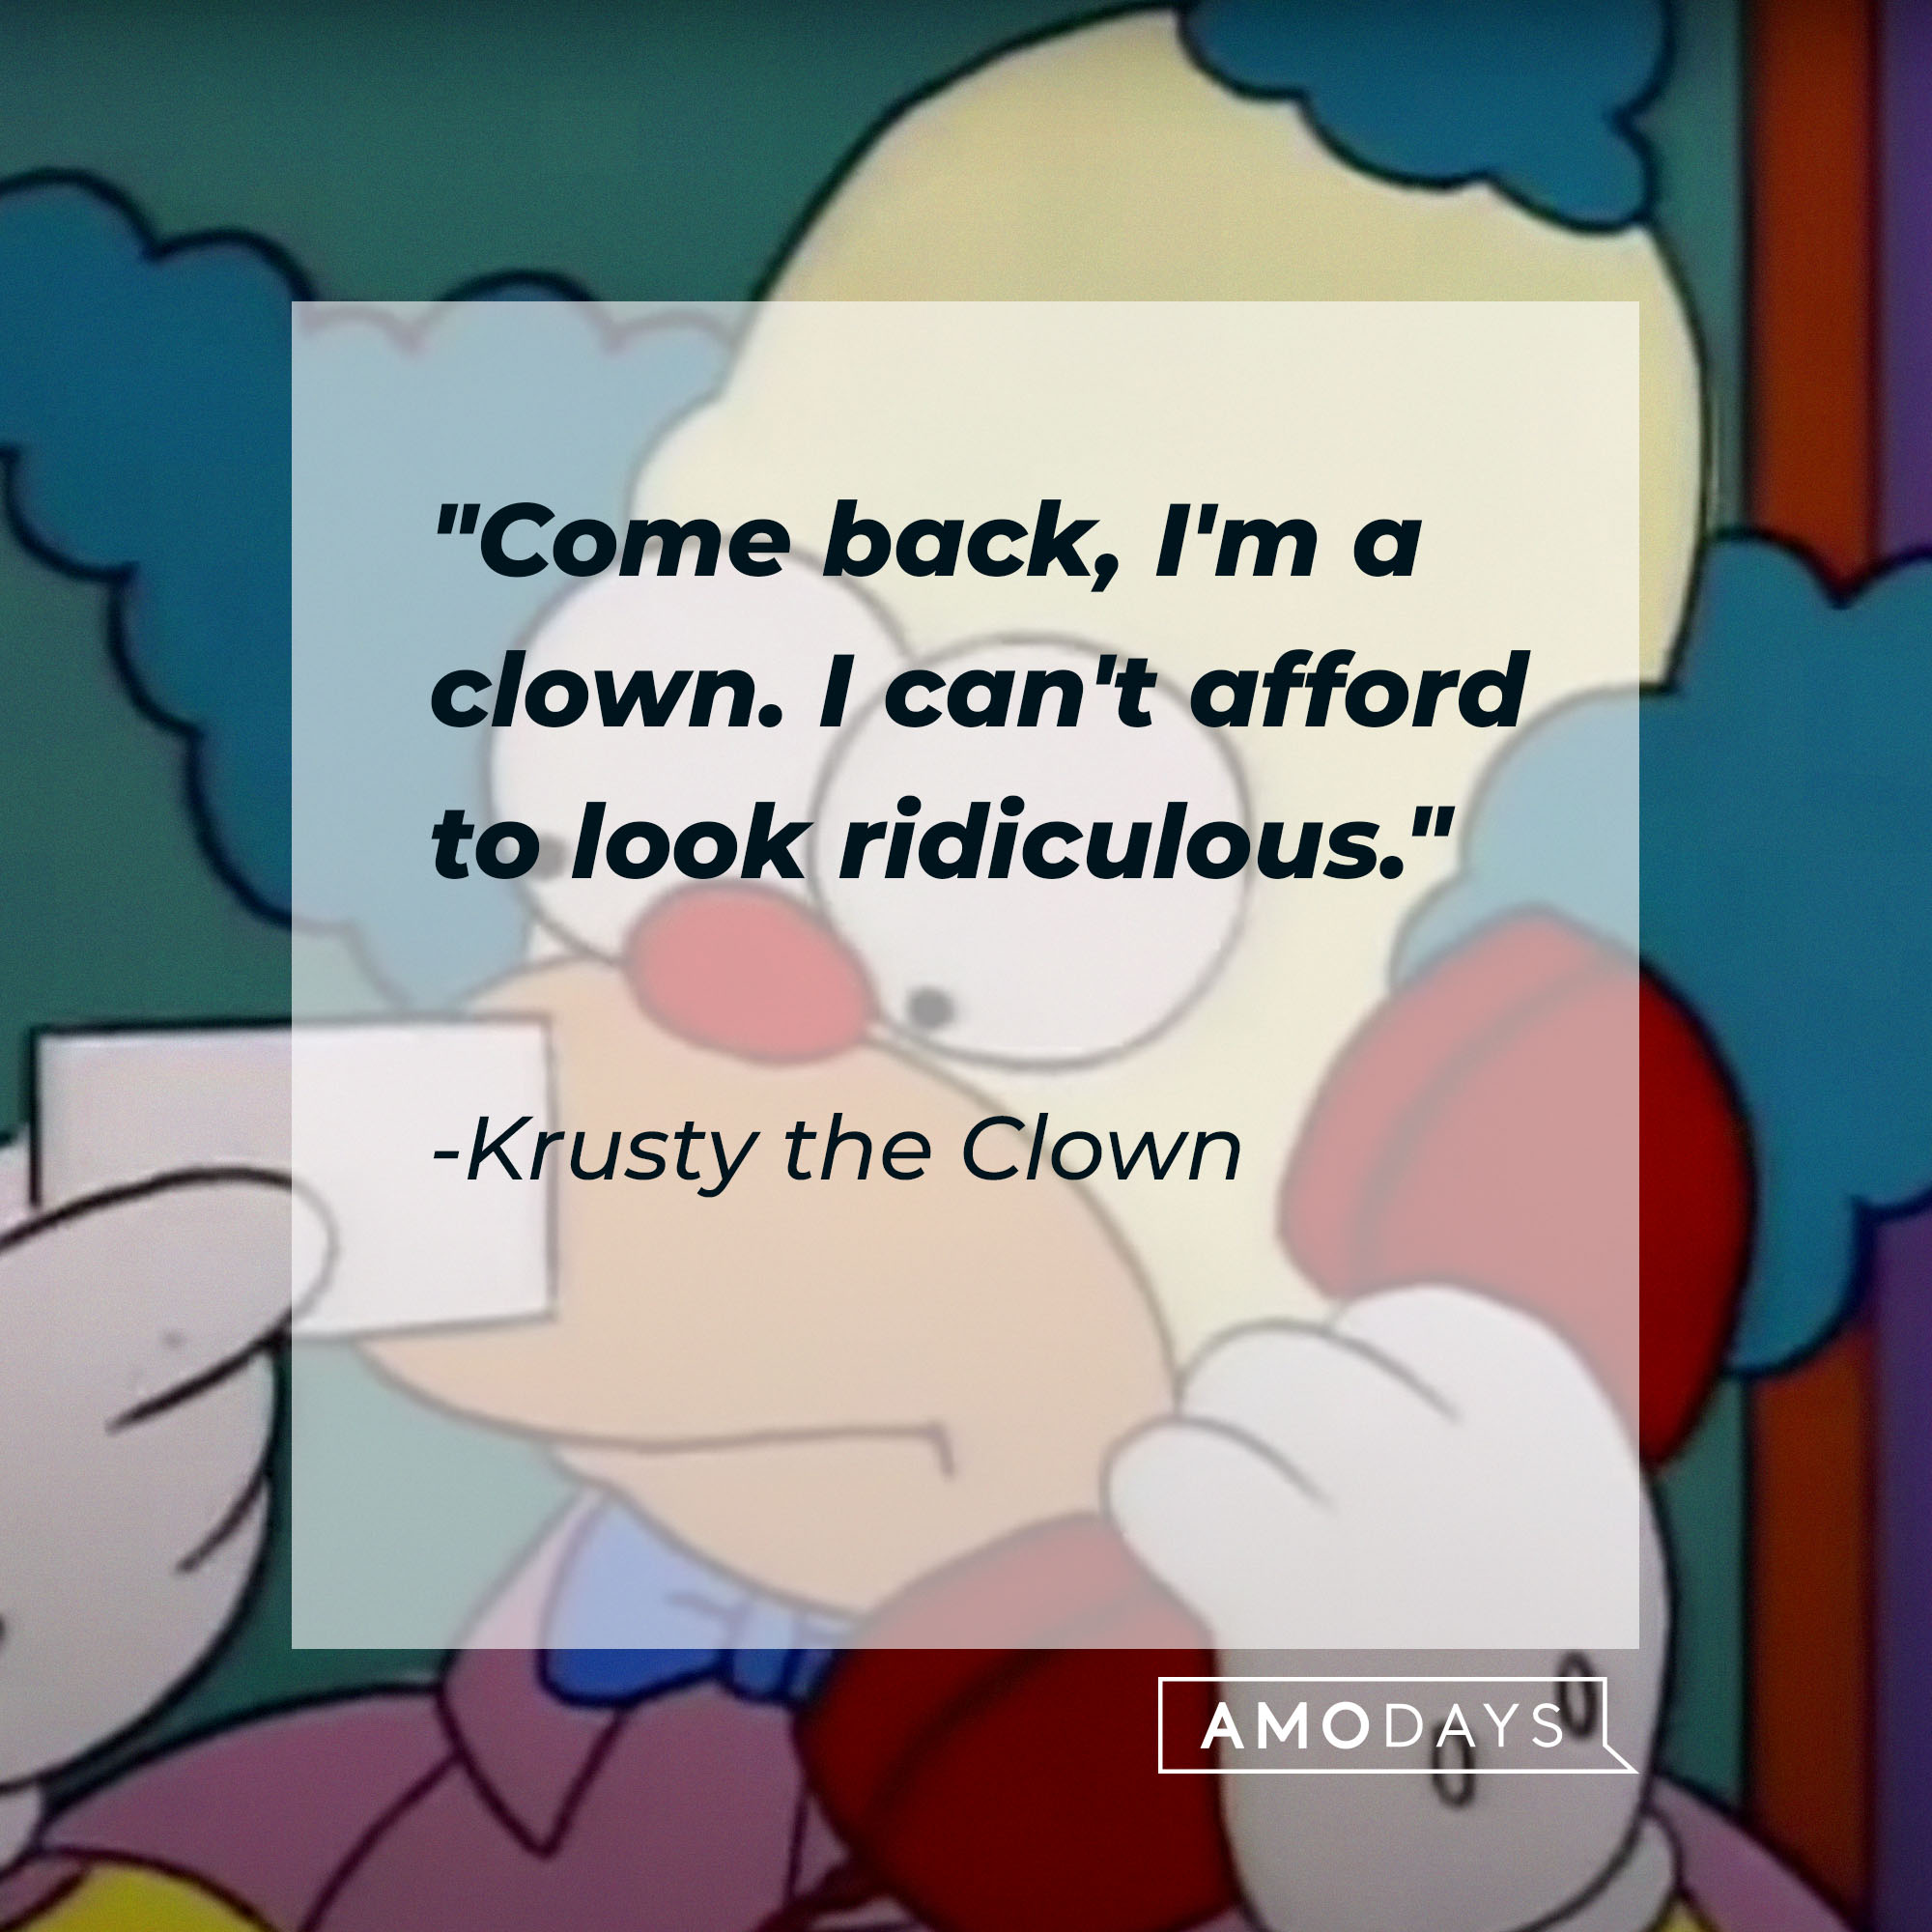 Krusty the Clown's quote: "Come back, I'm a clown. I can't afford to look ridiculous" | Source: Facebook.com/TheSimpsons